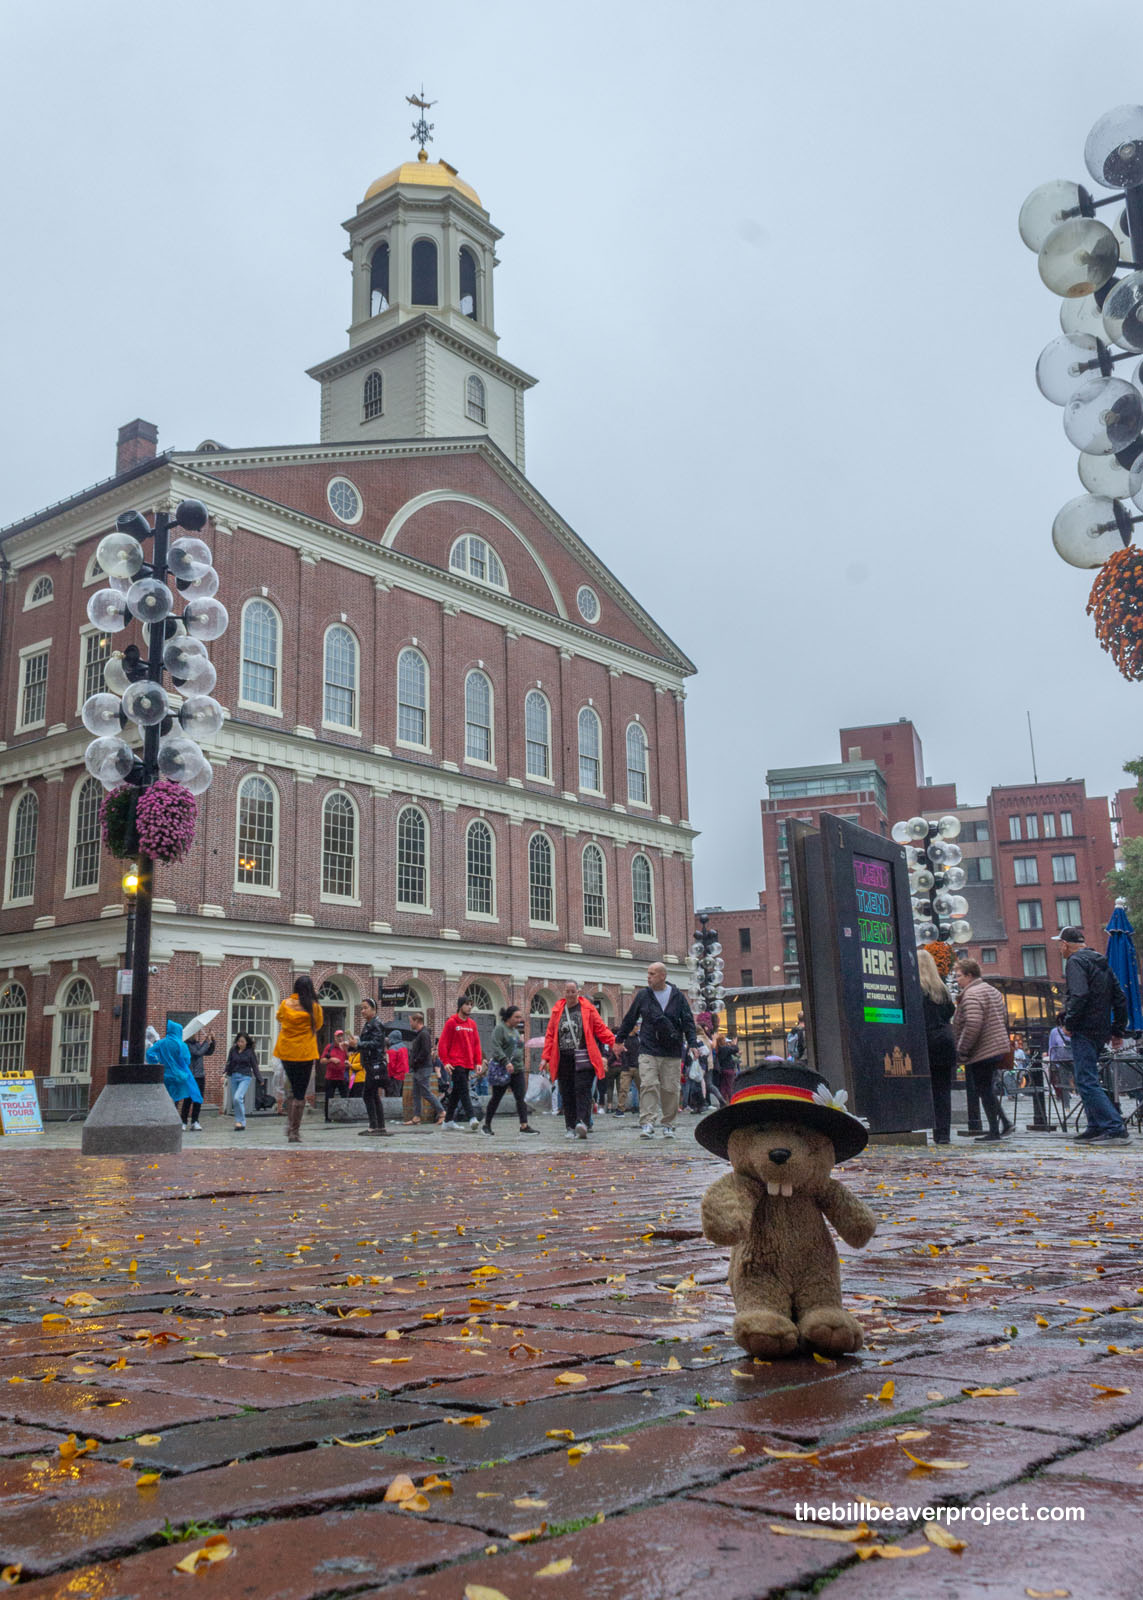 The backside of Faneuil Hall in the rain!